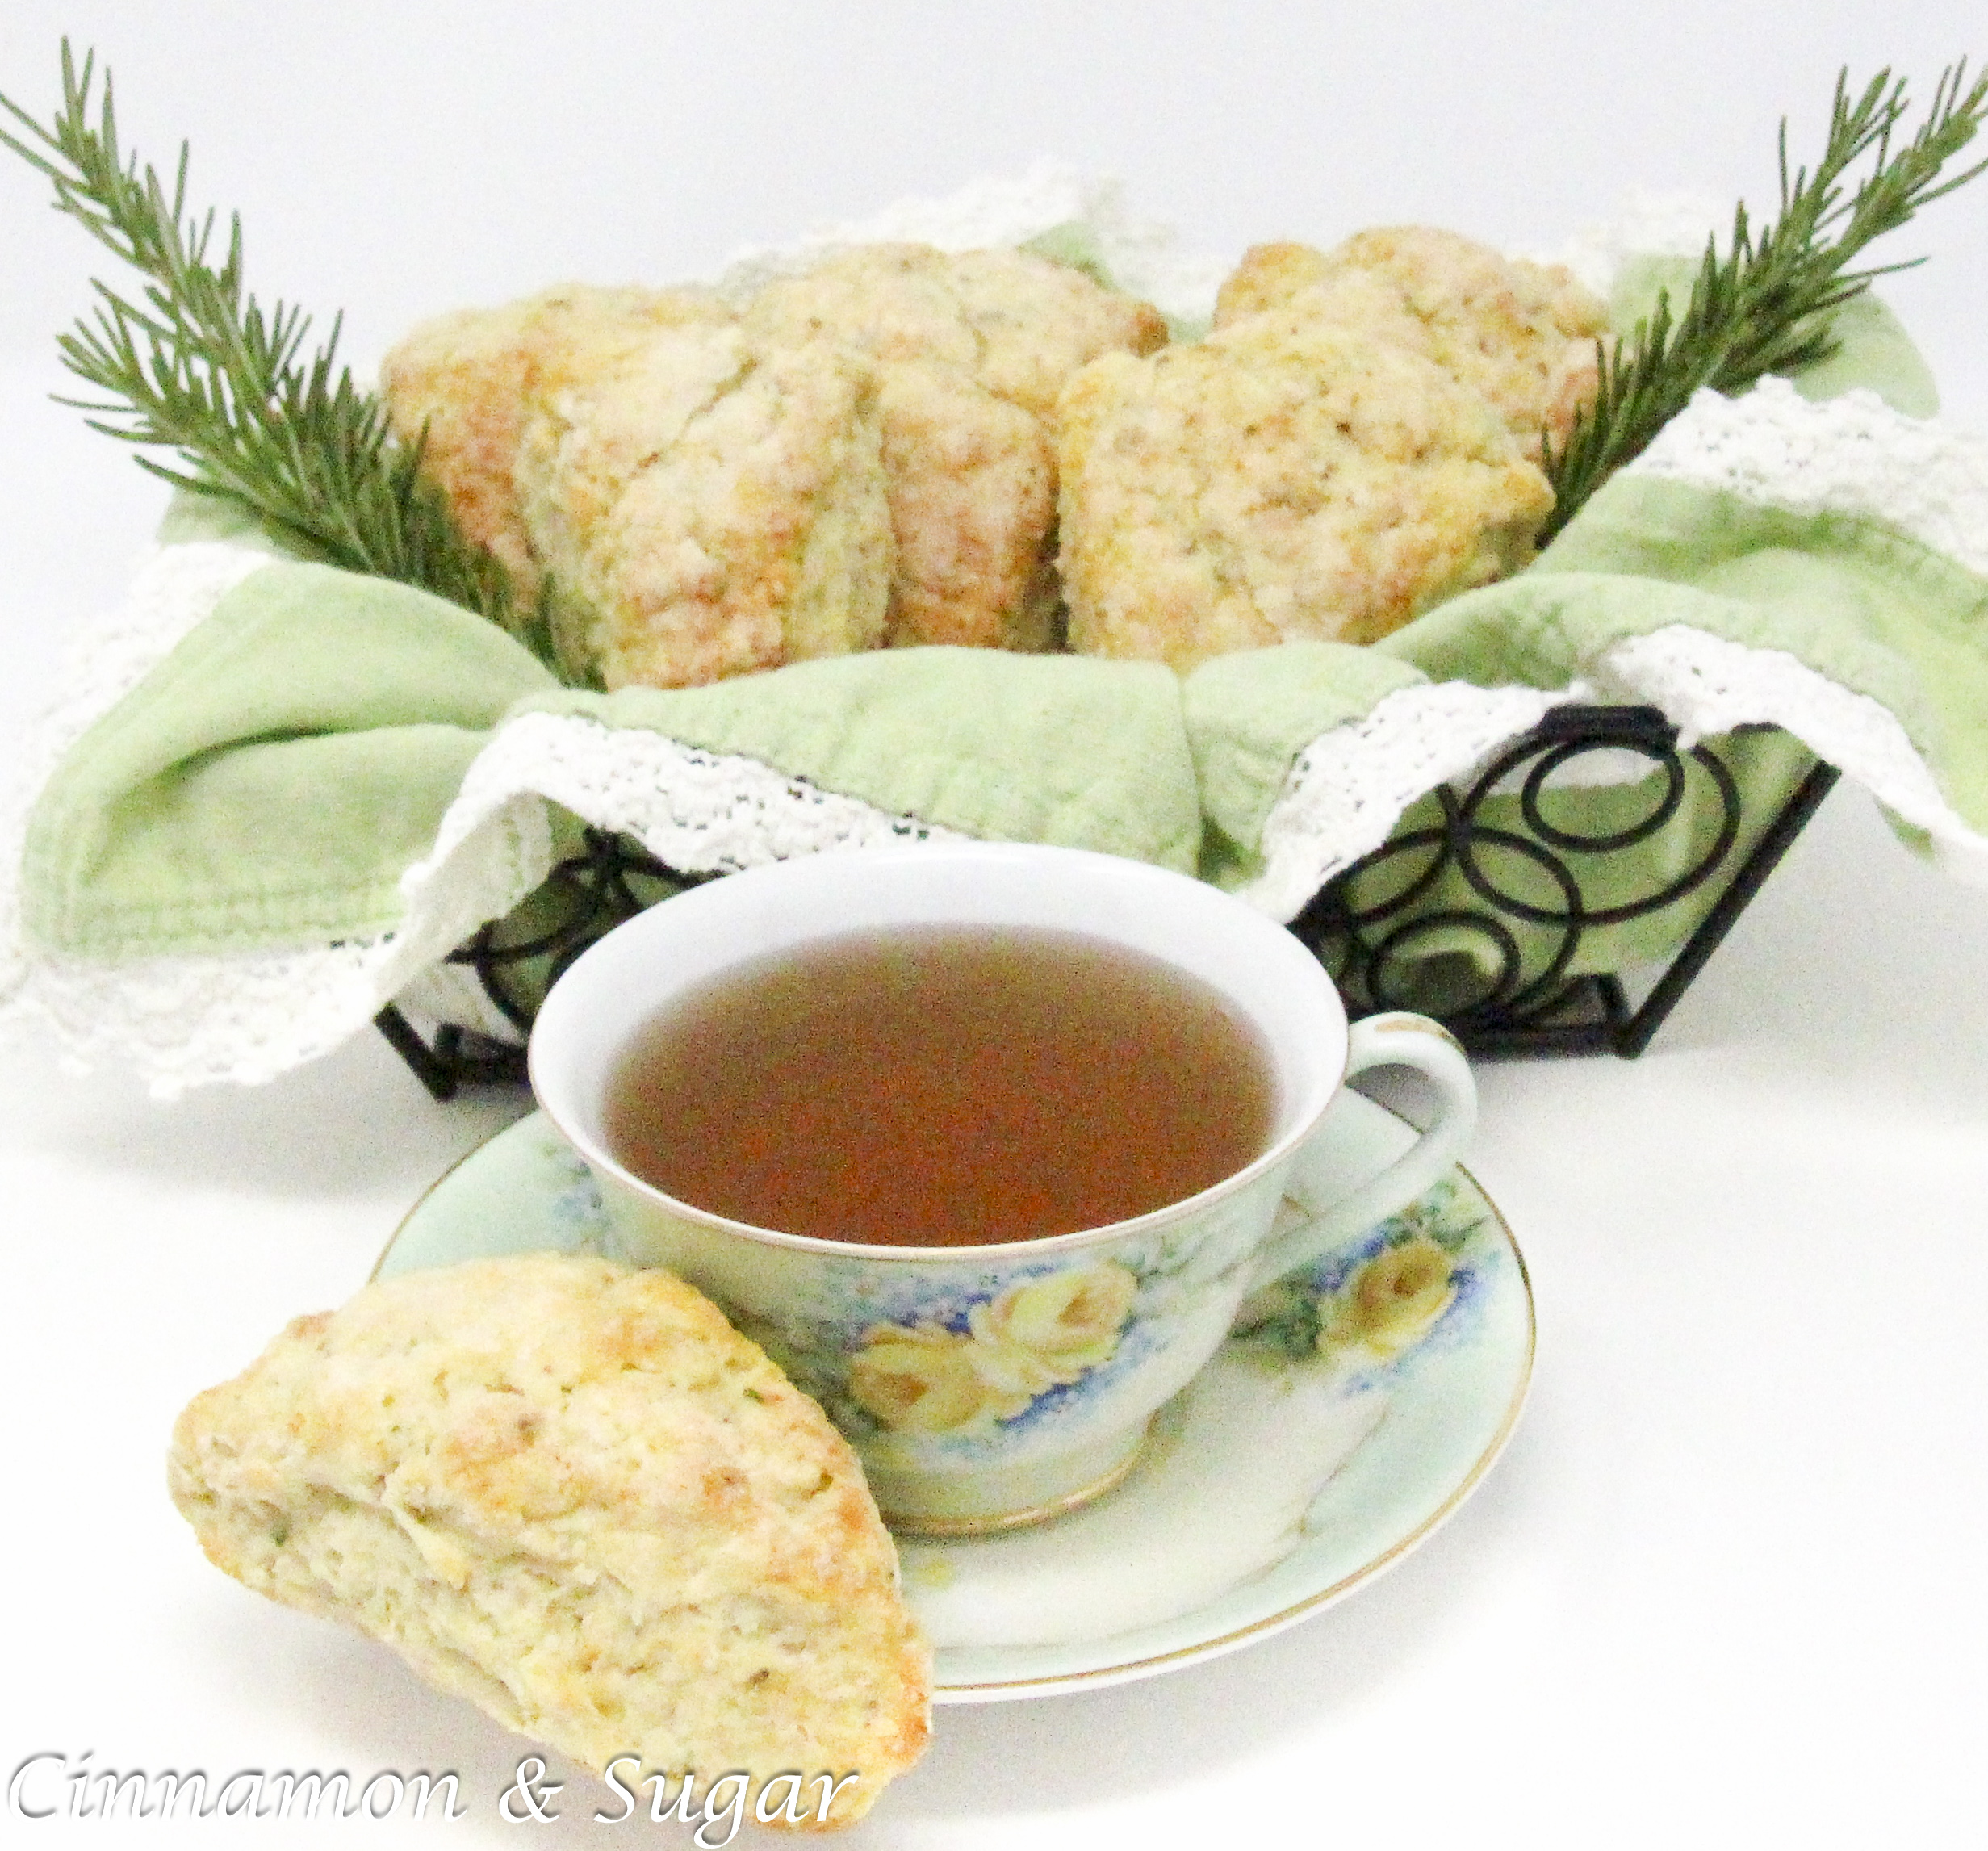 Flaky and rich, these scones contained just the right amount of rosemary while the lemon complemented and tempered the flavor. Recipe shared with permission granted by Maddie Day, author of NO GRATER CRIME.